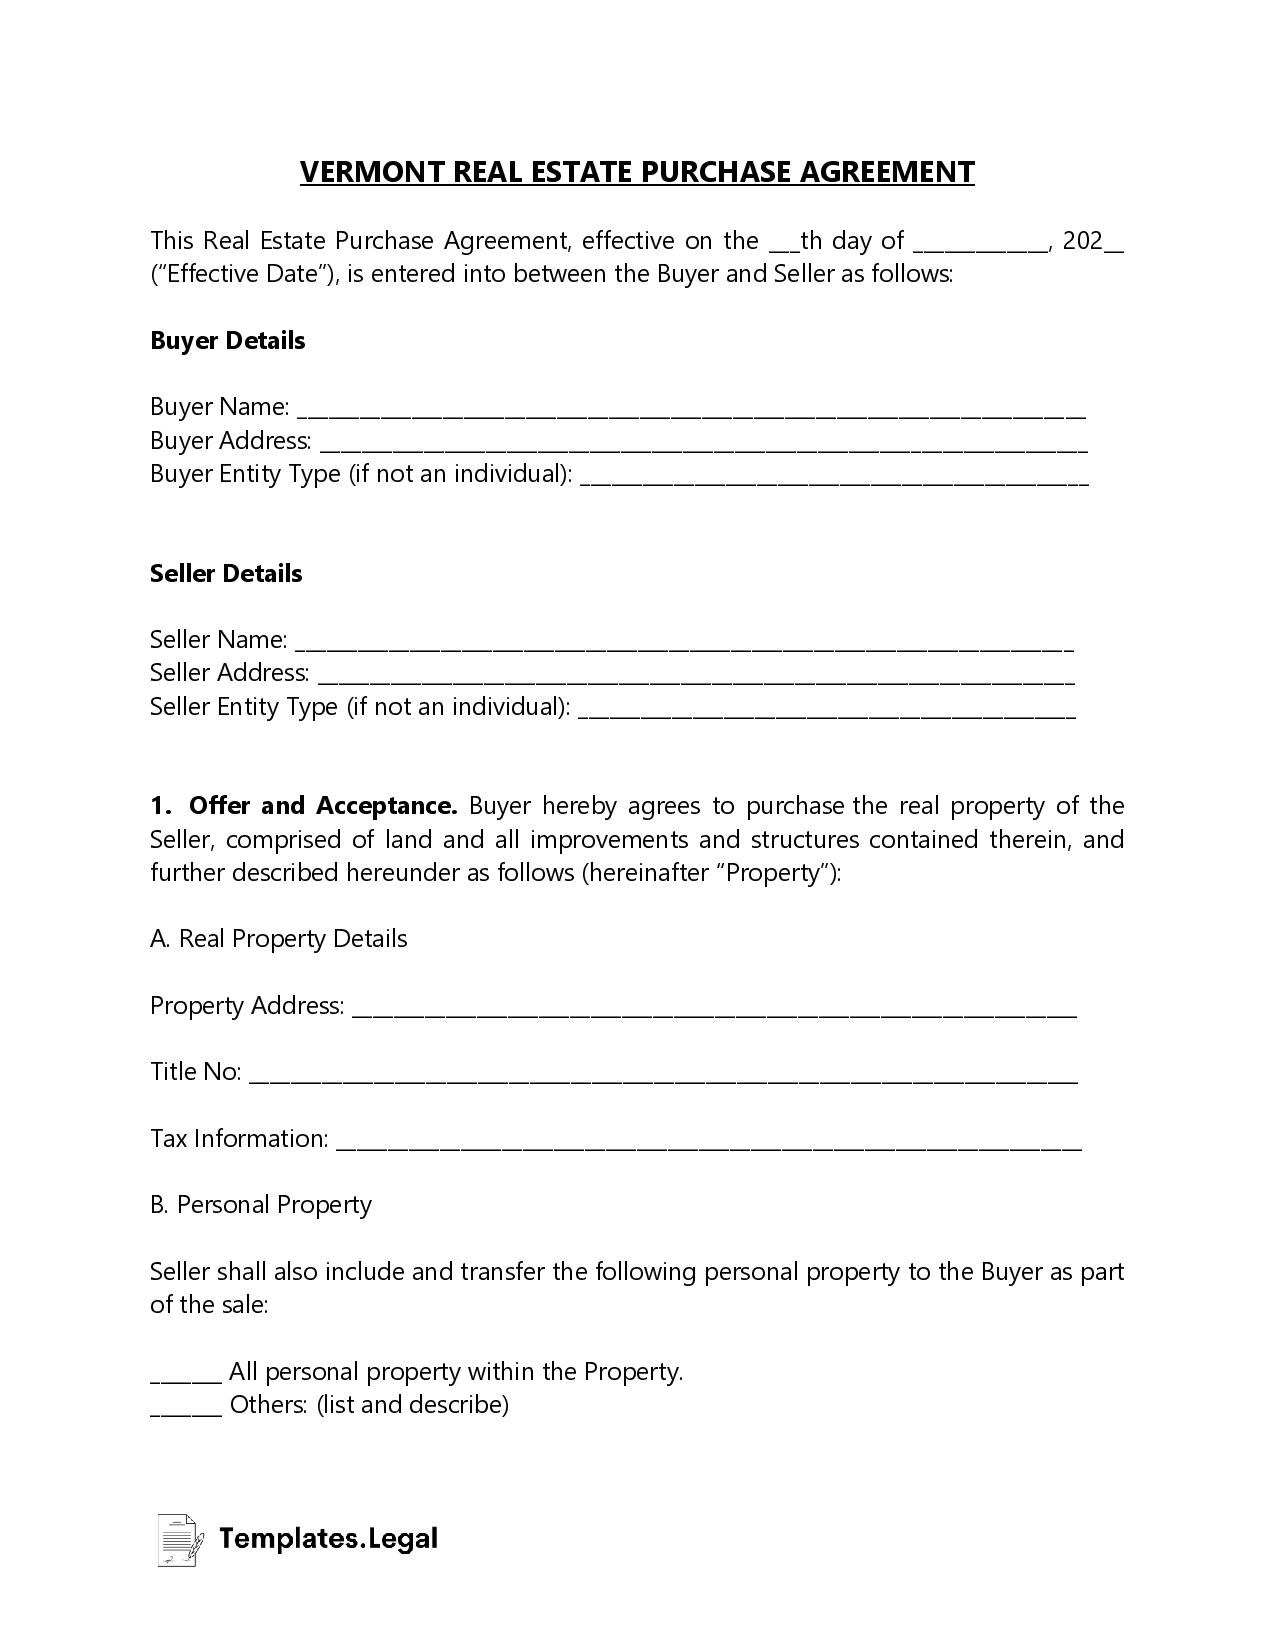 Vermont Real Estate Purchase Agreement - Templates.Legal